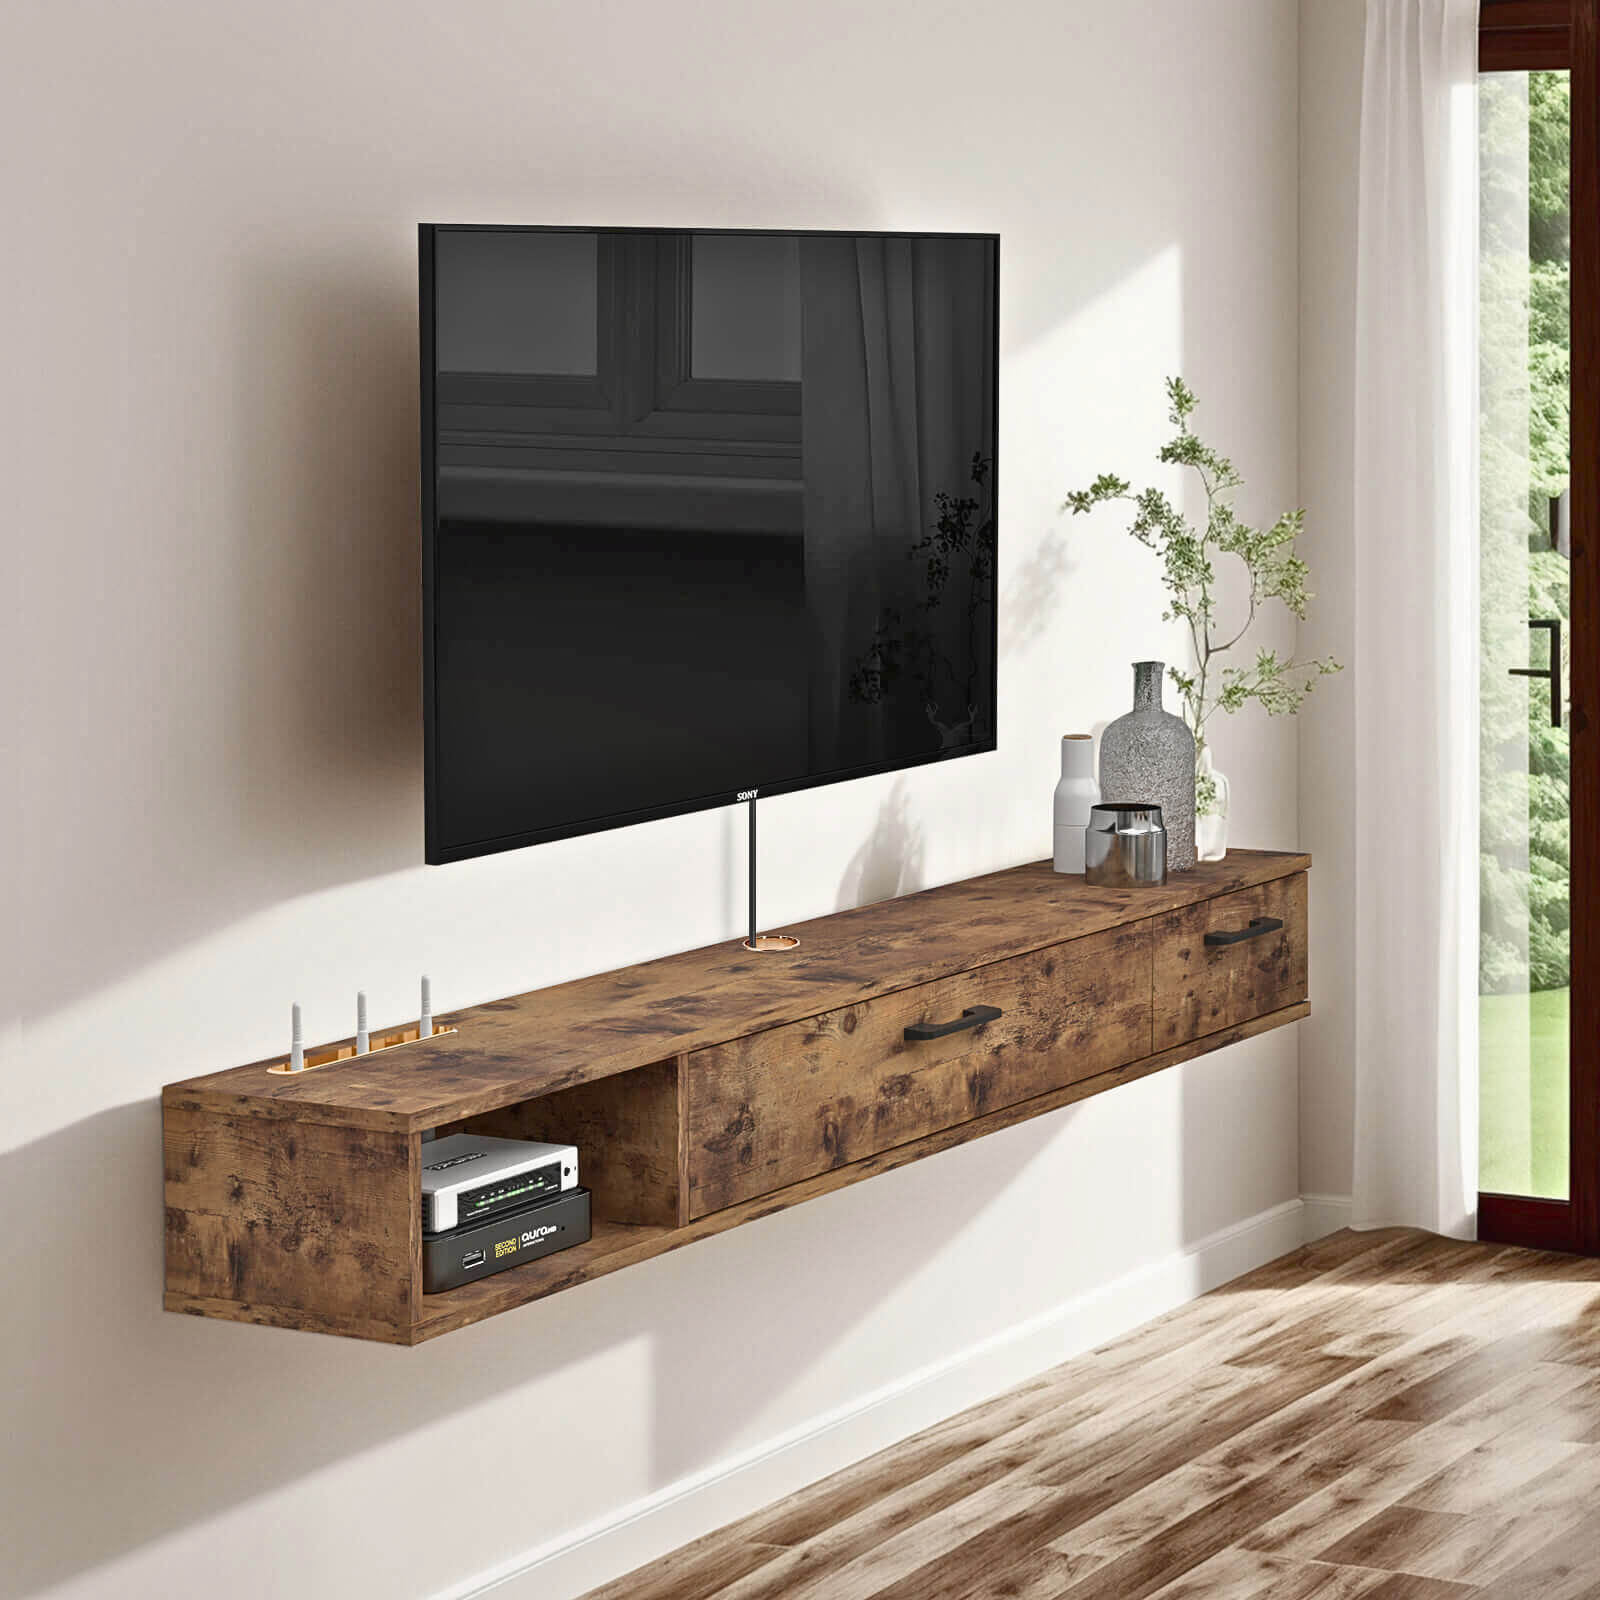 Rustic Brown Floating TV Stand with Two-Door Cabinets for 32"-50" TVs